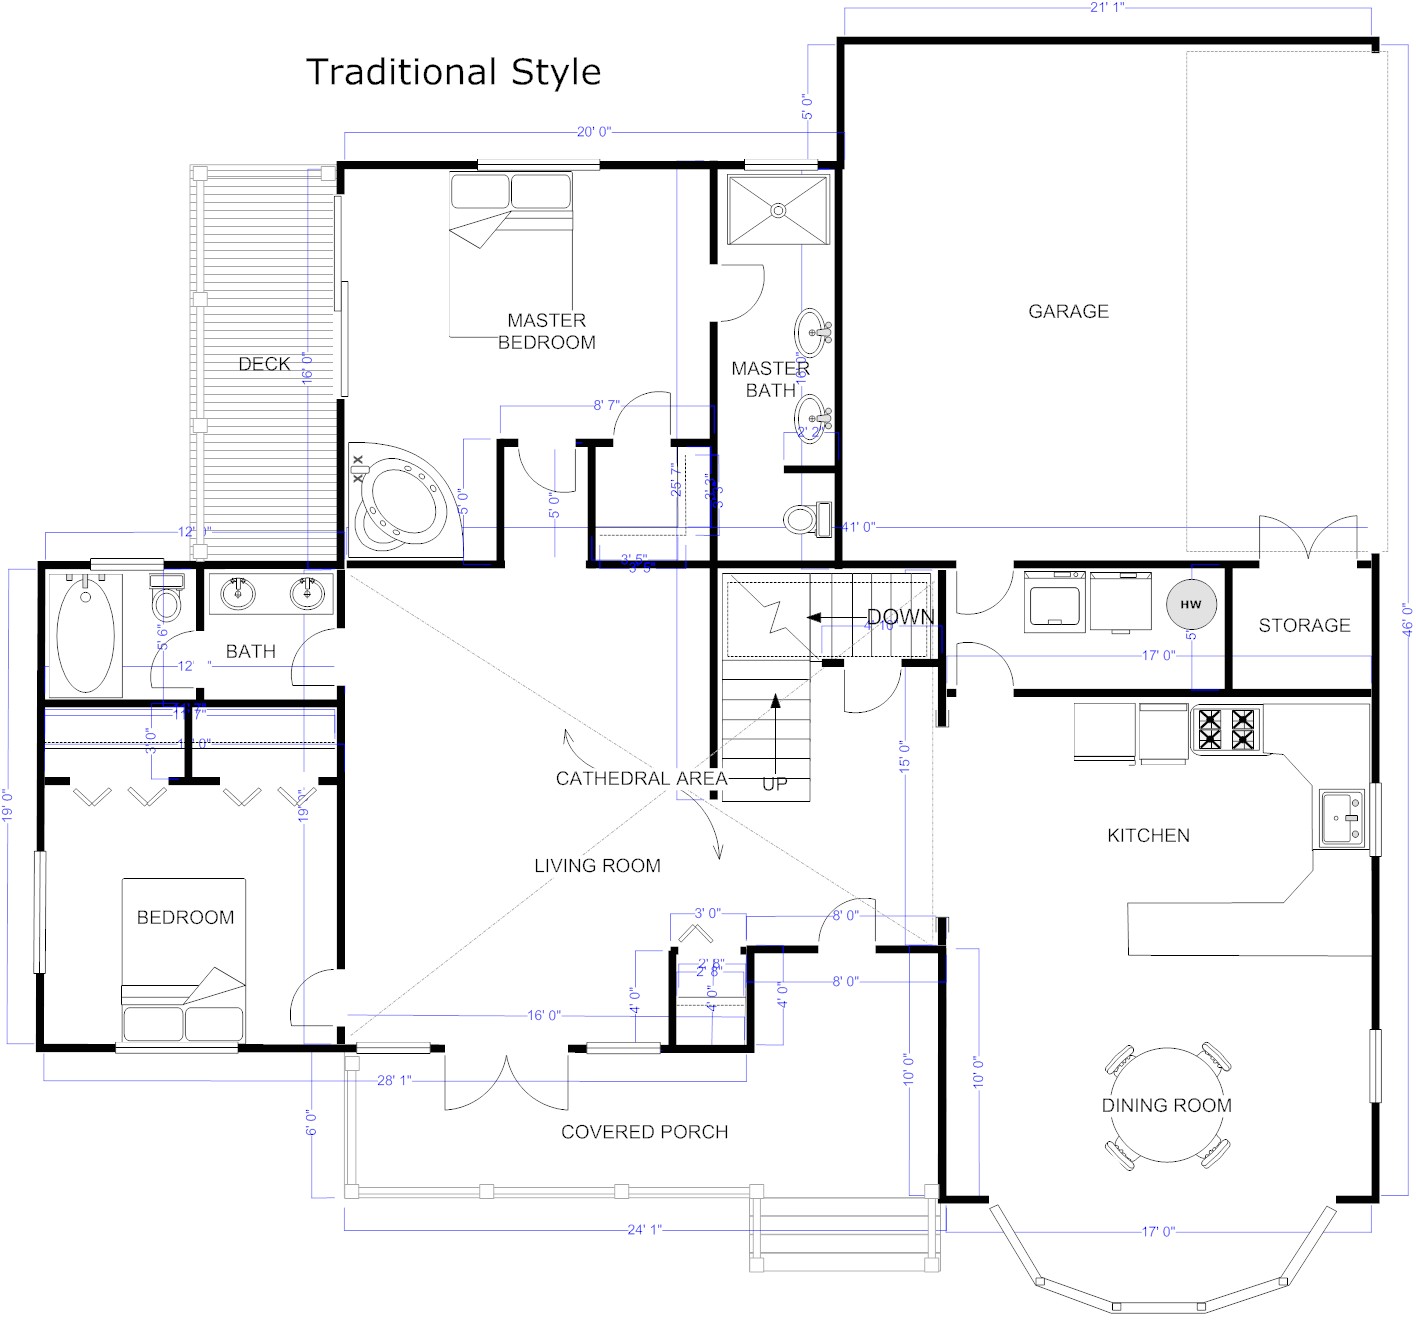 Home Plan Drawing Online Architecture software Free Download Online App